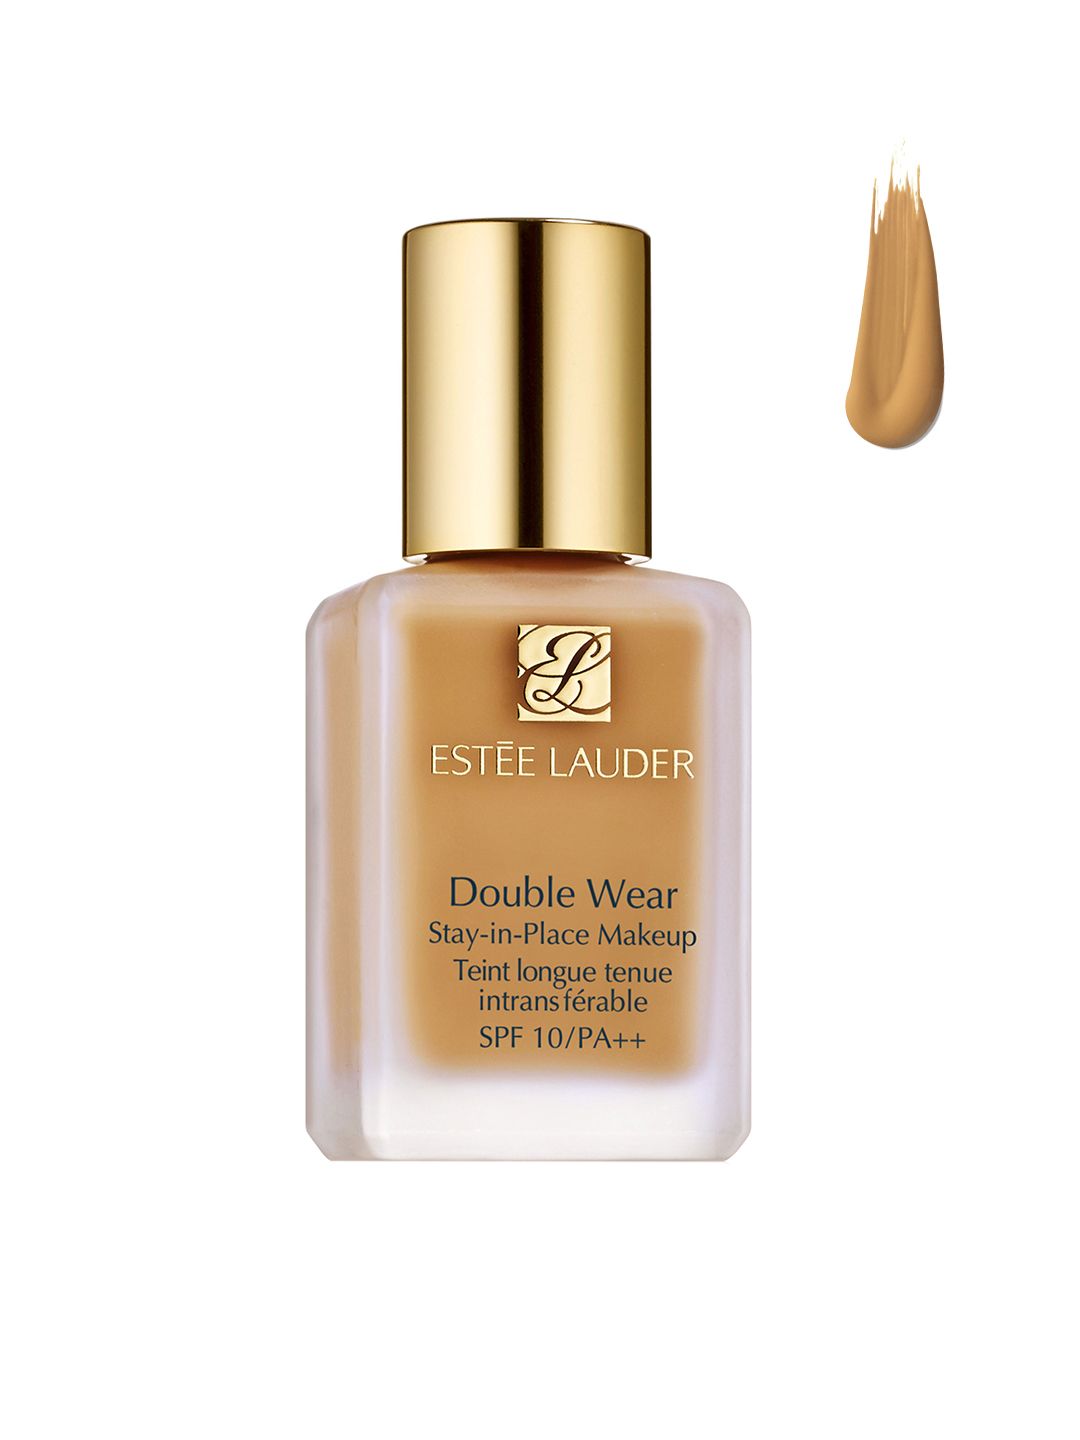 Estee Lauder Double Wear Stay-in-Place Makeup Foundation SPF 10/PA++ - Fawn 3W1.5 30 ml Price in India